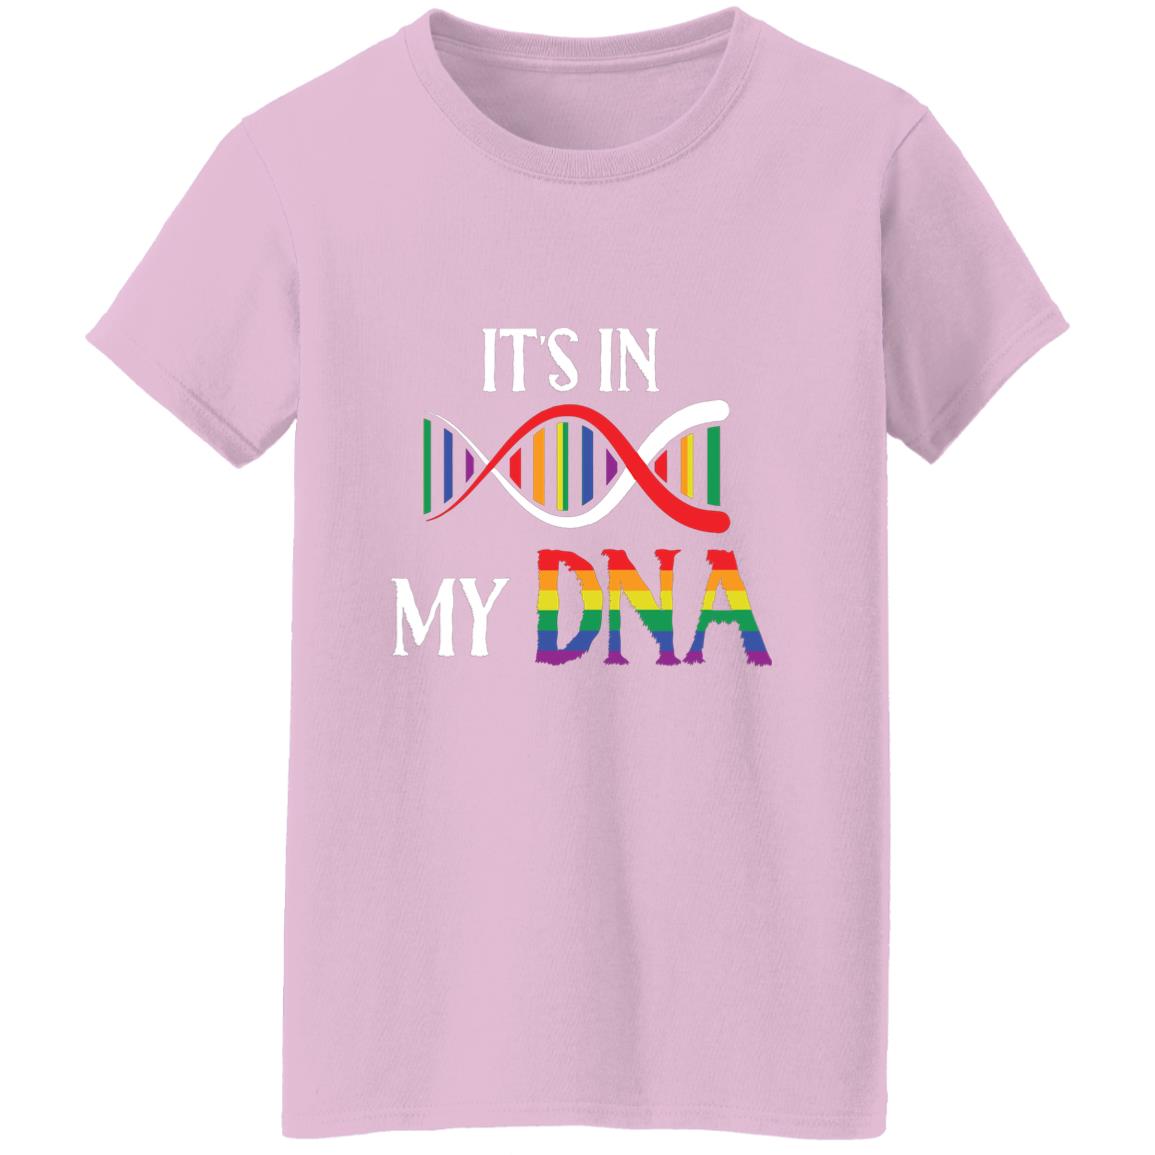 It's In My DNA - T shirt & Hoodie